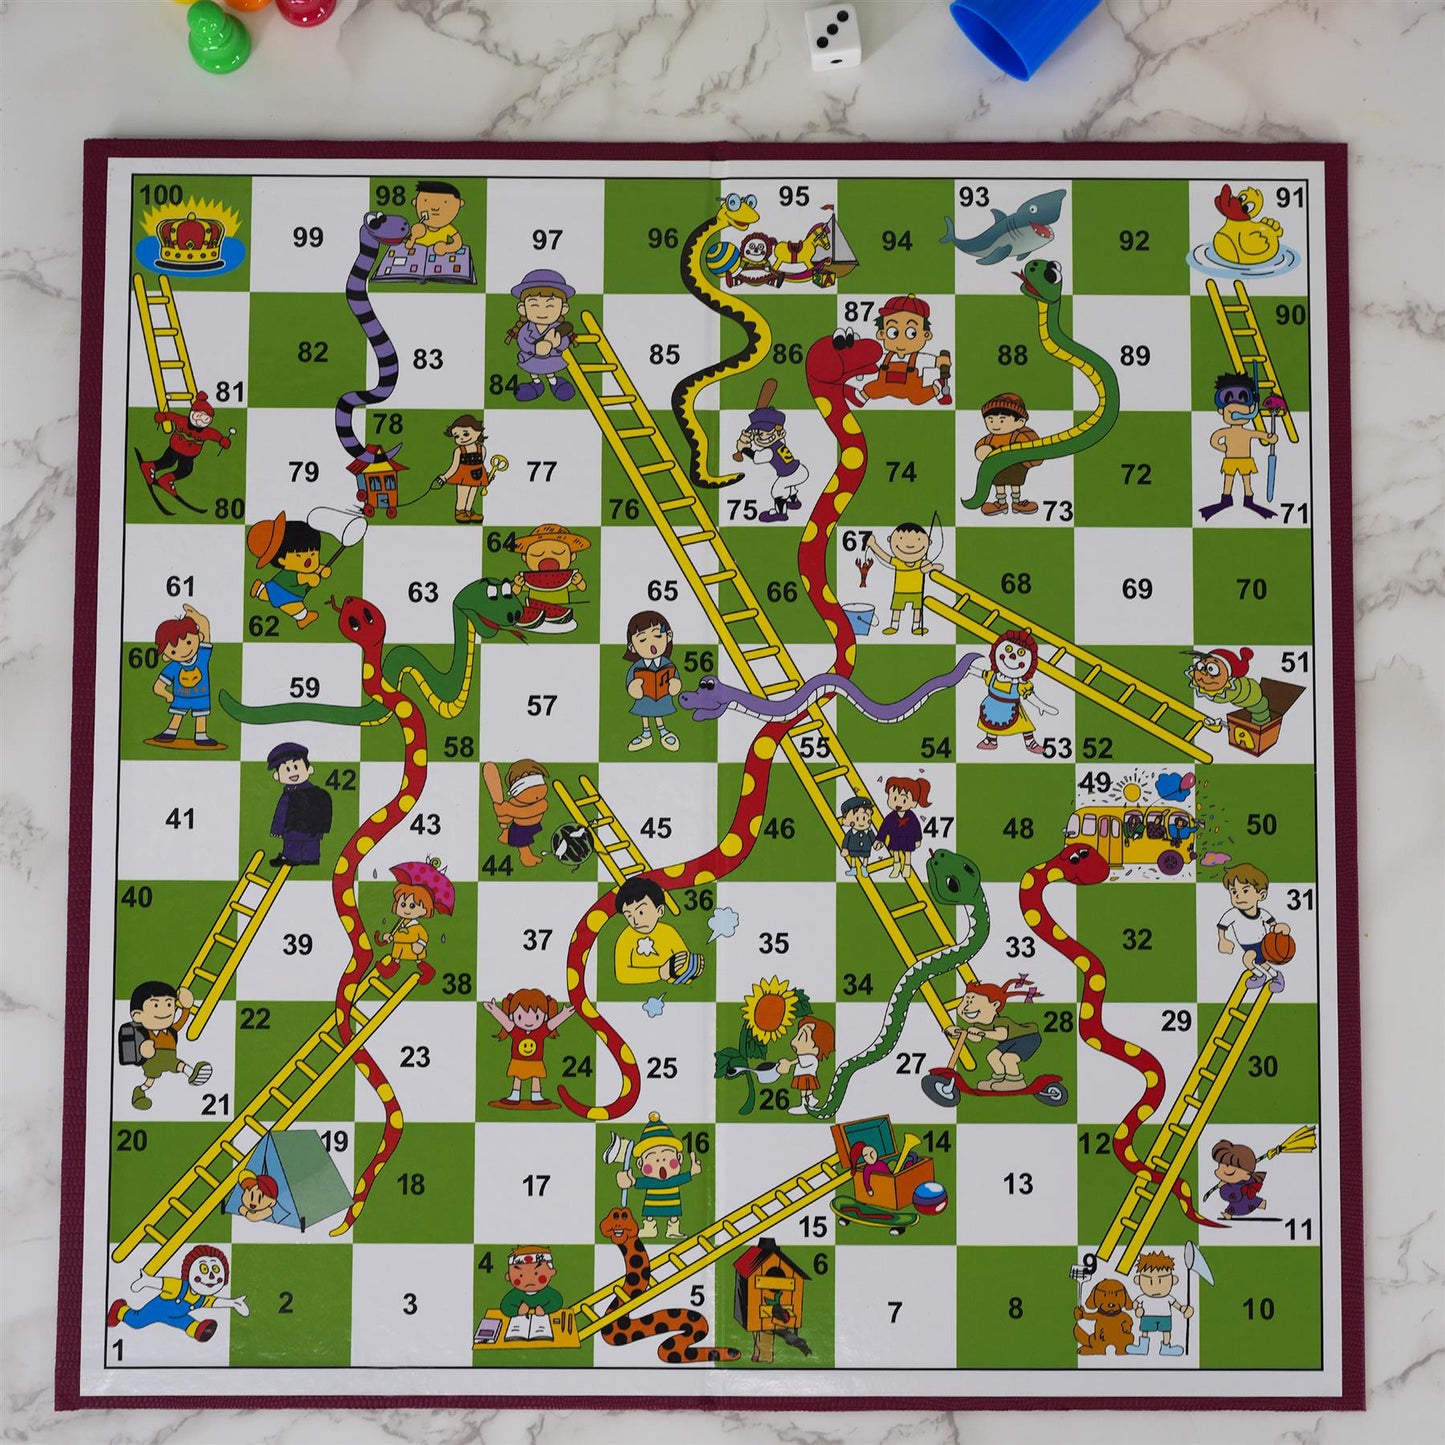 Snakes and Ladders Traditional Board Game by The Magic Toy Shop - UKBuyZone